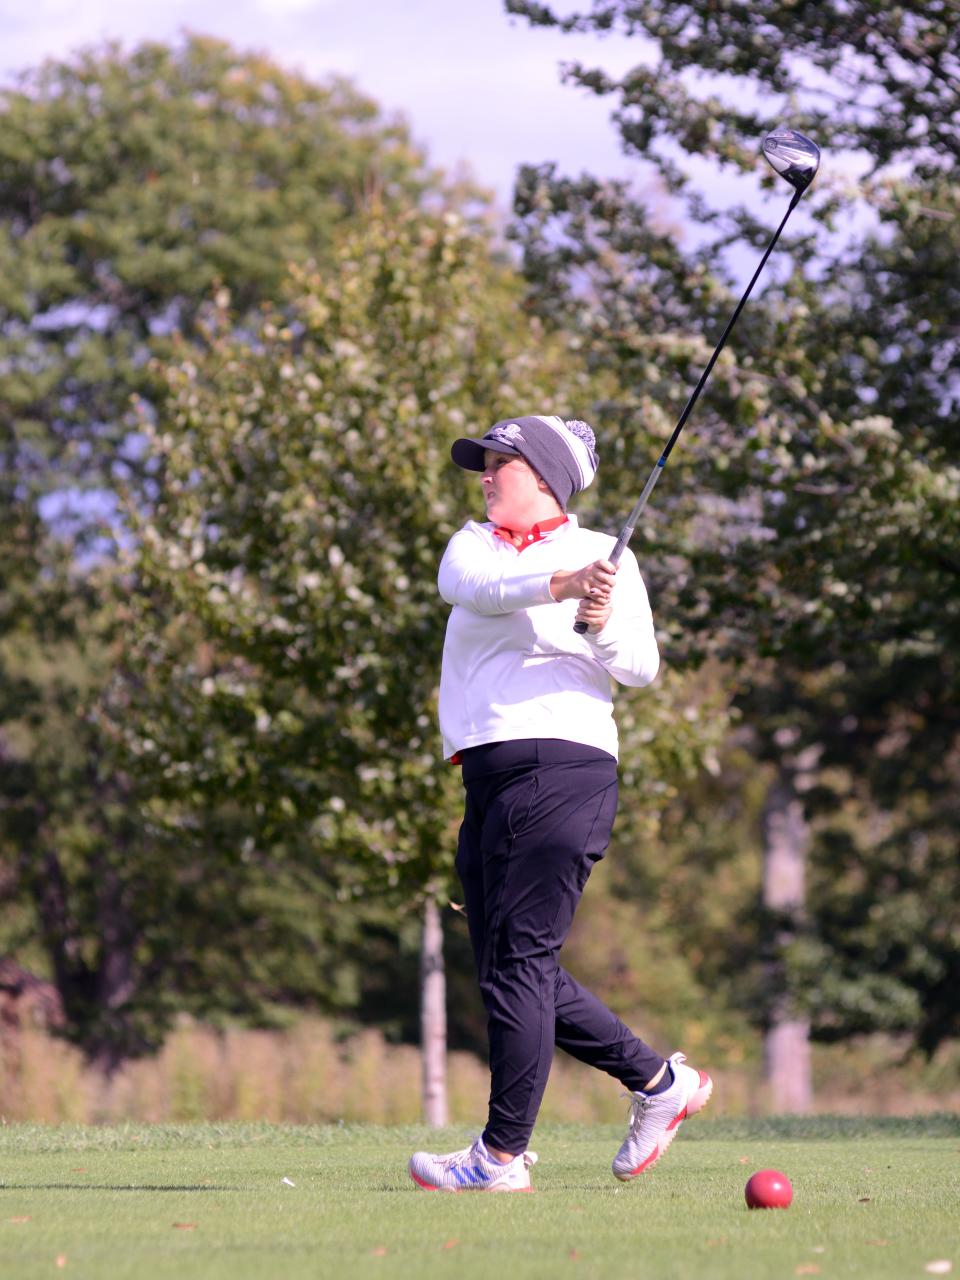 Crooksville's Riley McKenzie hits a tee shot during the Division II girls state golf tournament on Saturday at Ohio State's Gray Course. McKenzie shot 81 and finished with a two-day total of 162 to finish tied for 16th of 73 players. She will return to the Gray Course this weekend for her second state appearance.